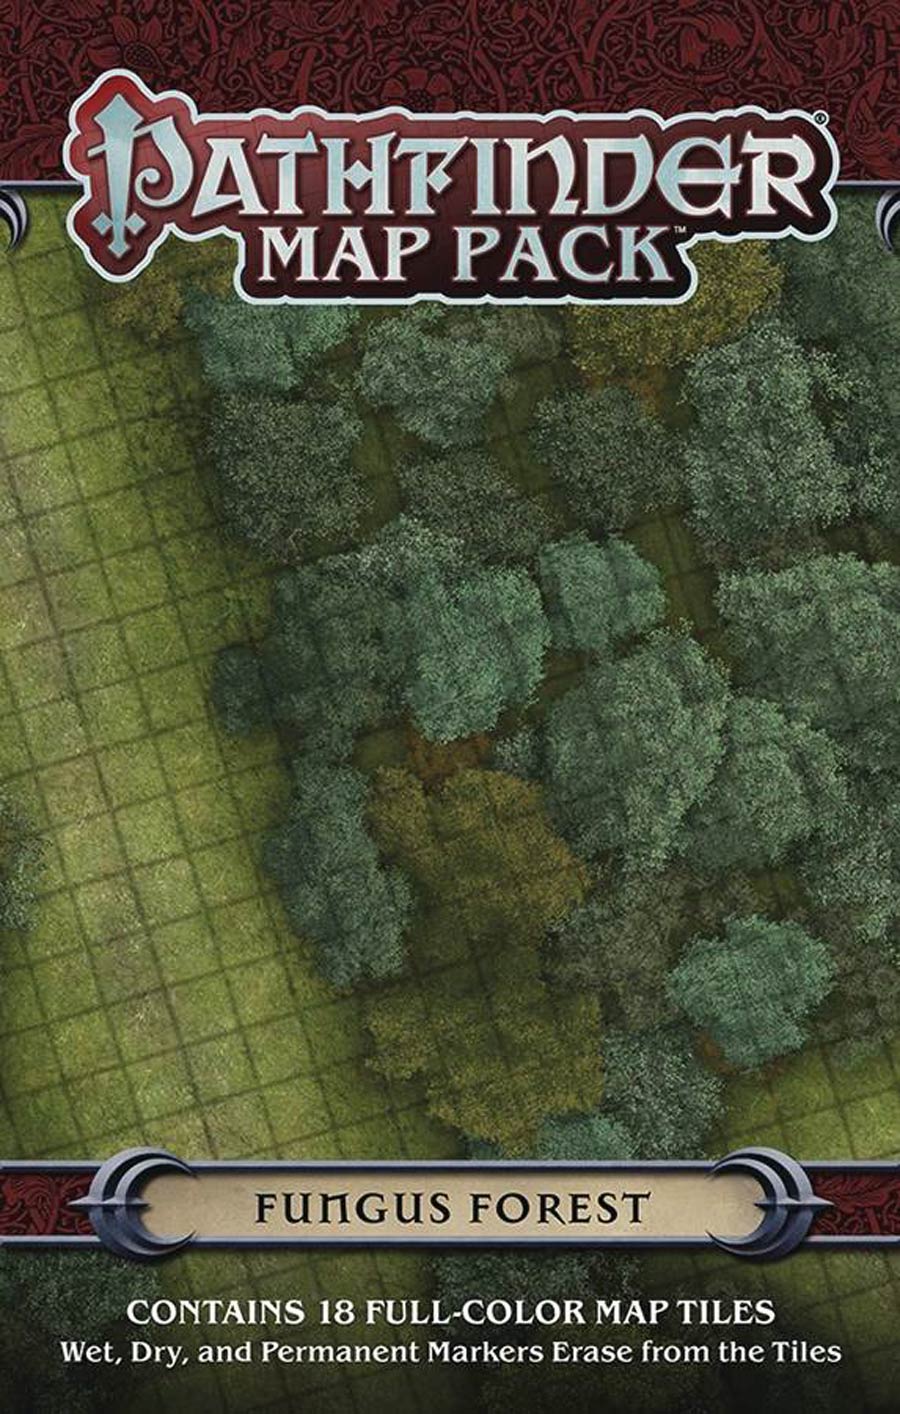 Pathfinder Map Pack - Fungus Forest